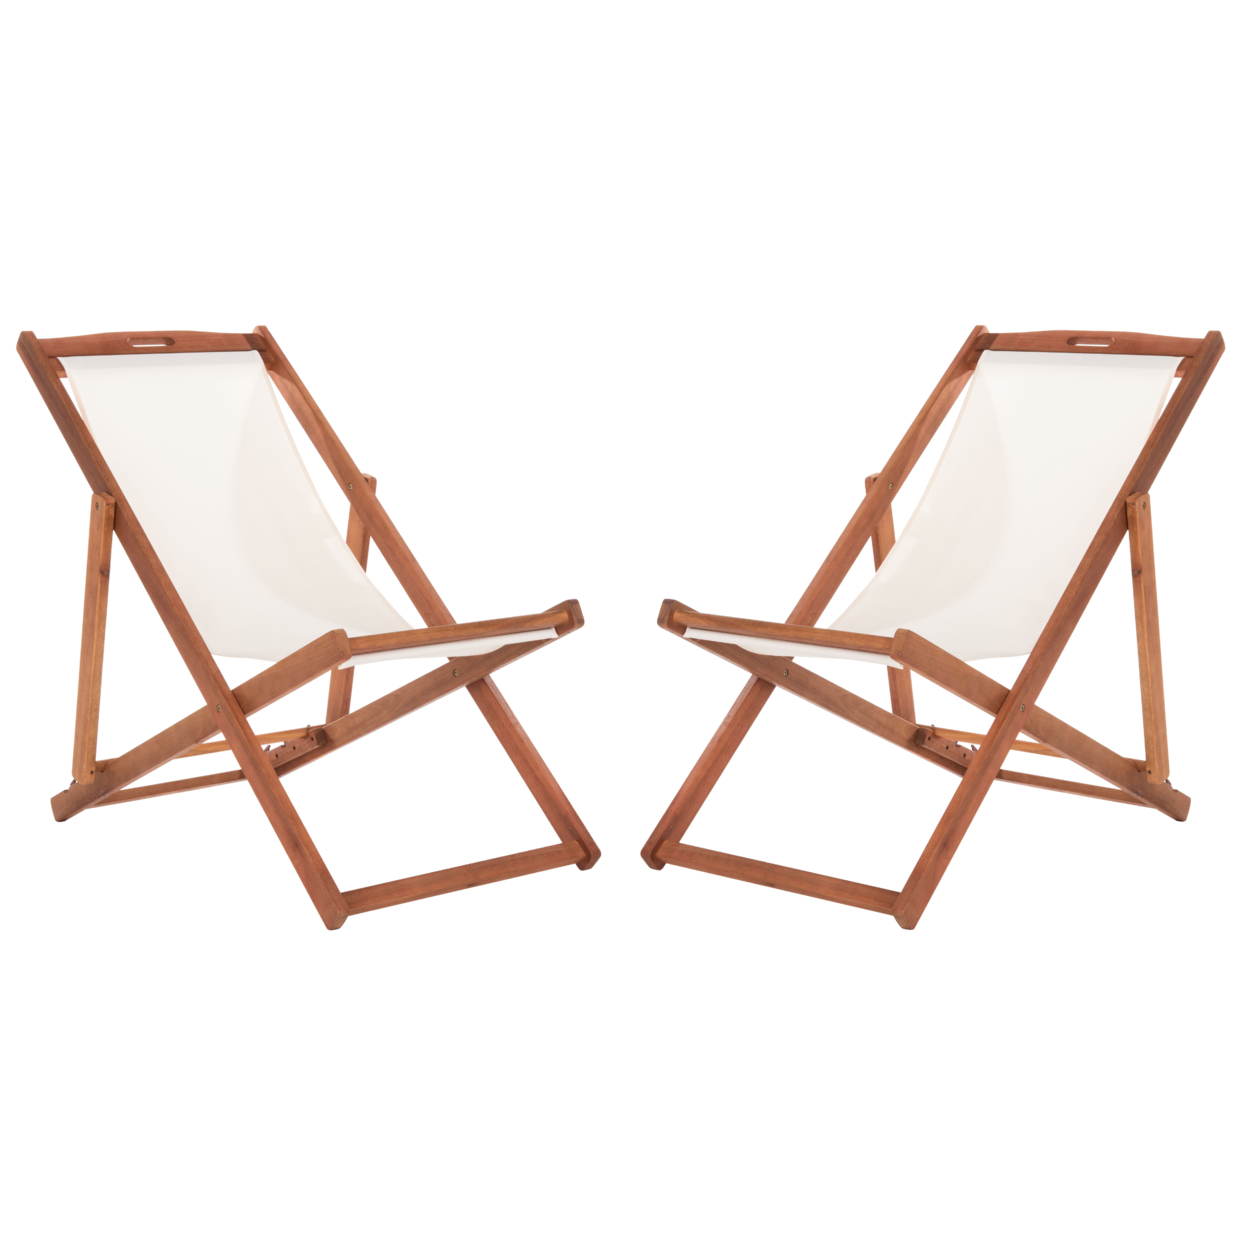 SAFAVIEH Outdoor Collection Loren Foldable Sling Chair Natural/Beige